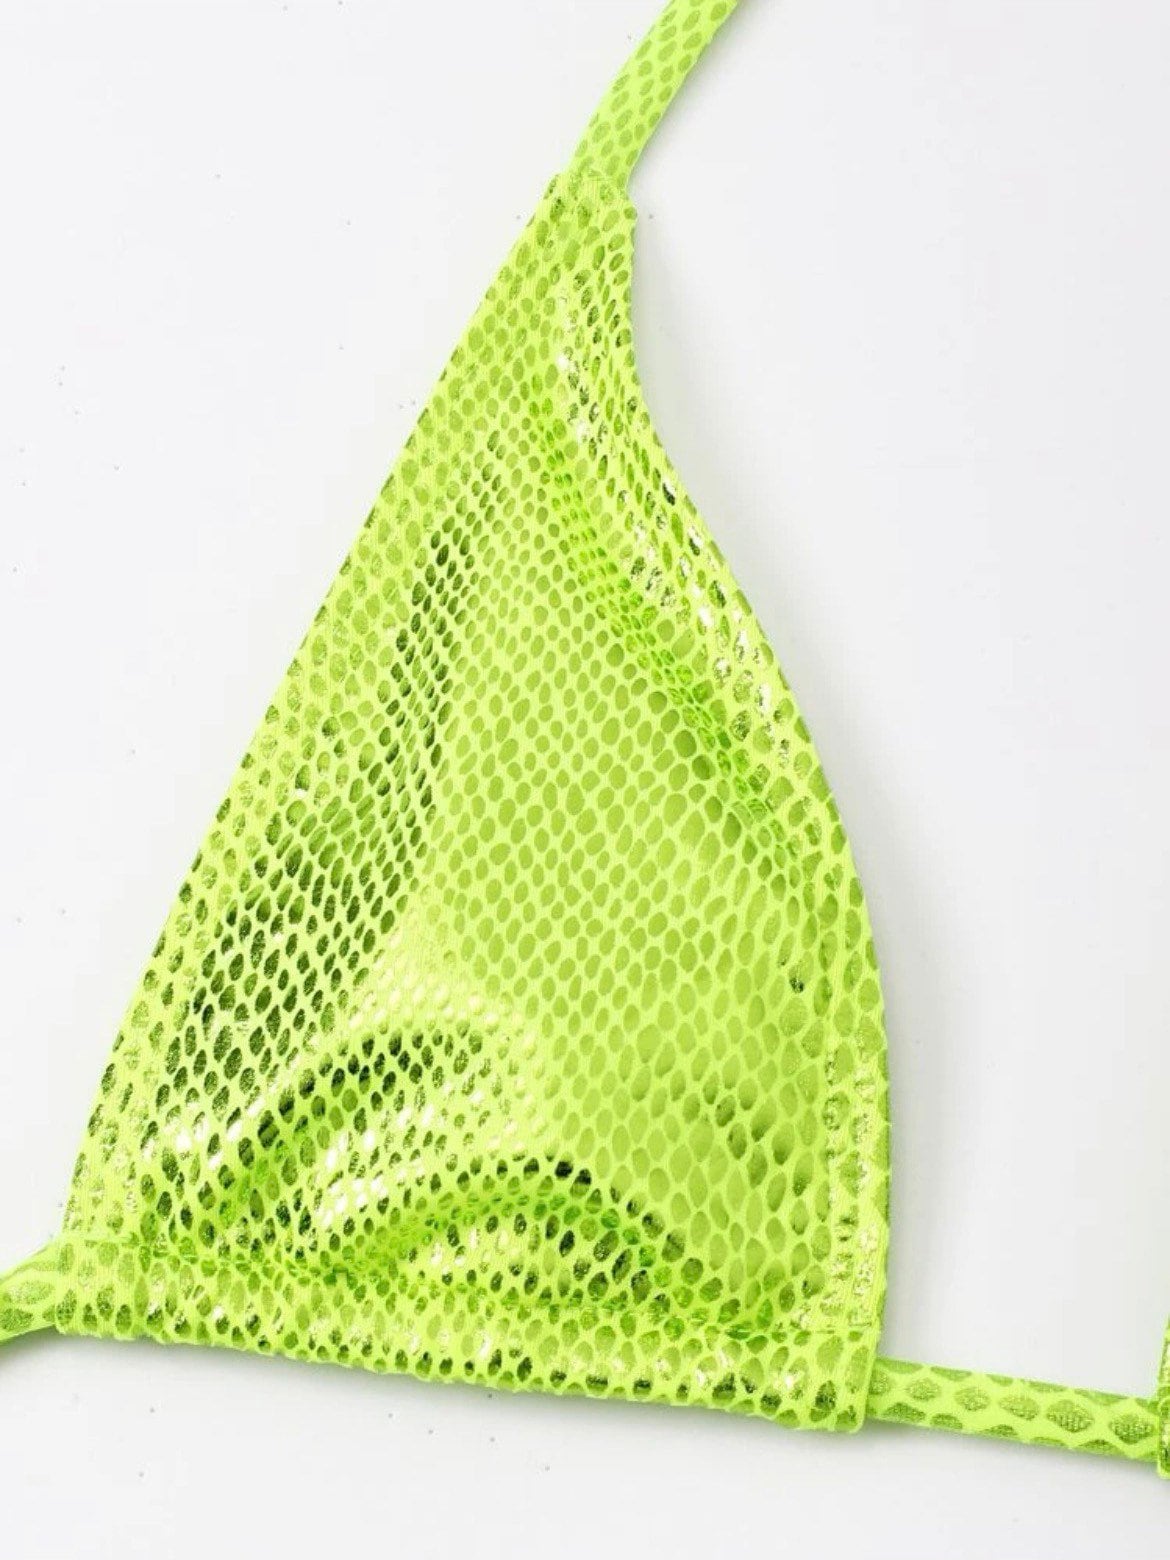 The Metallic Snake lime metallic green bikini with tie sides and snake print details triangle halter top tie and bottoms swimsuit set